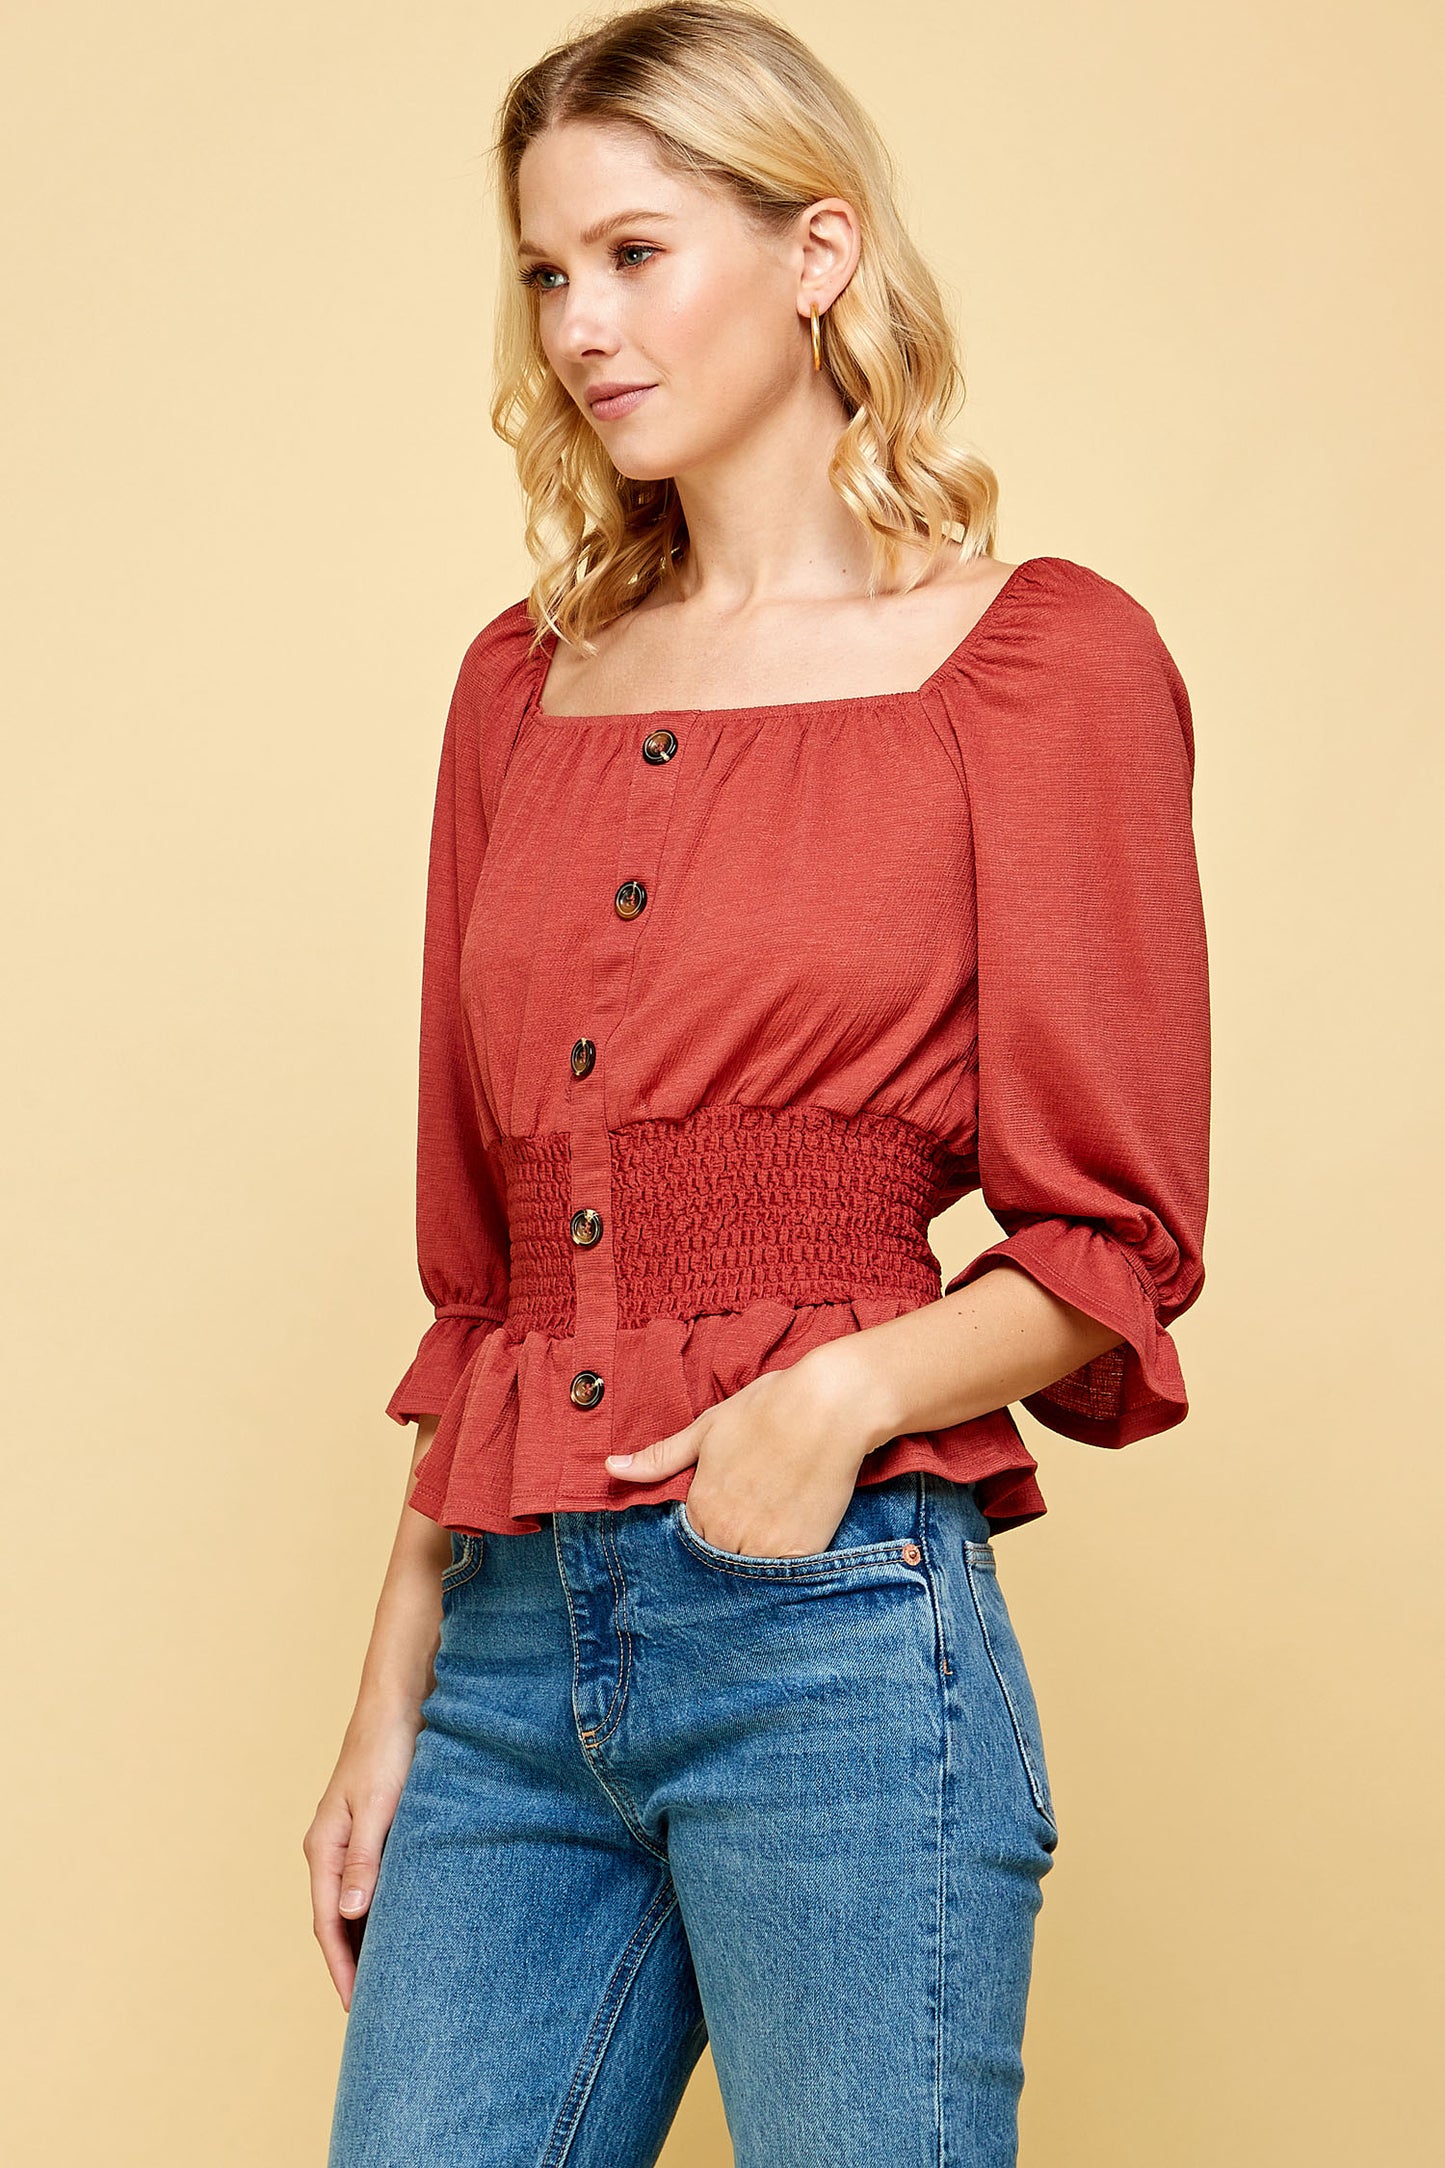 BUTTON DOWN SMOCKED PEPLUM TOP IN RUST